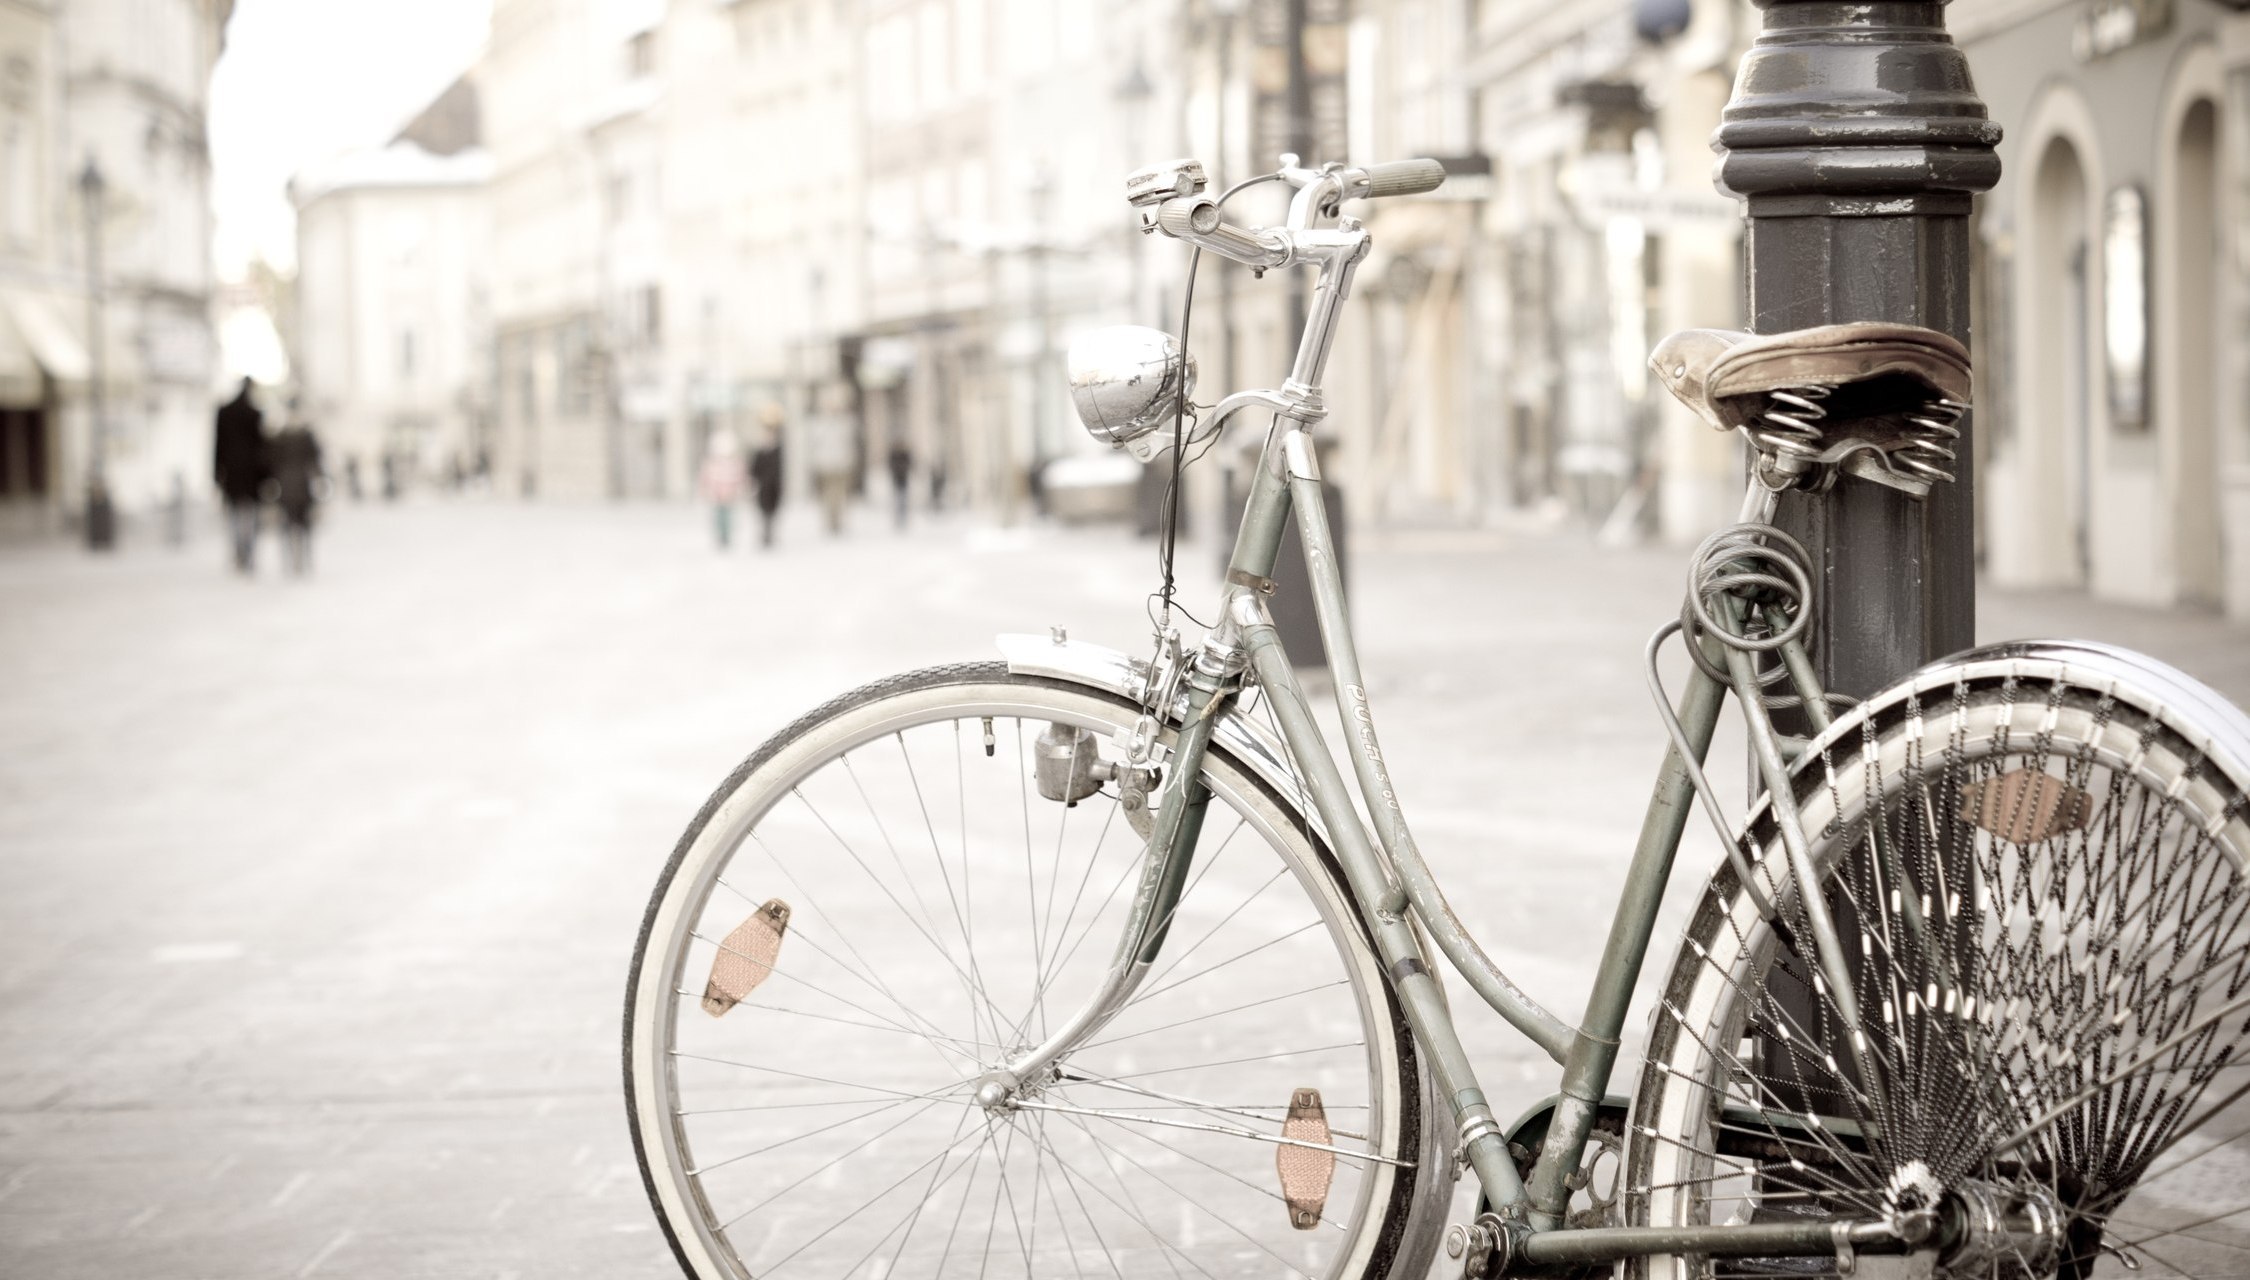 Old Bicycle In The City Center Wallpaper Pu